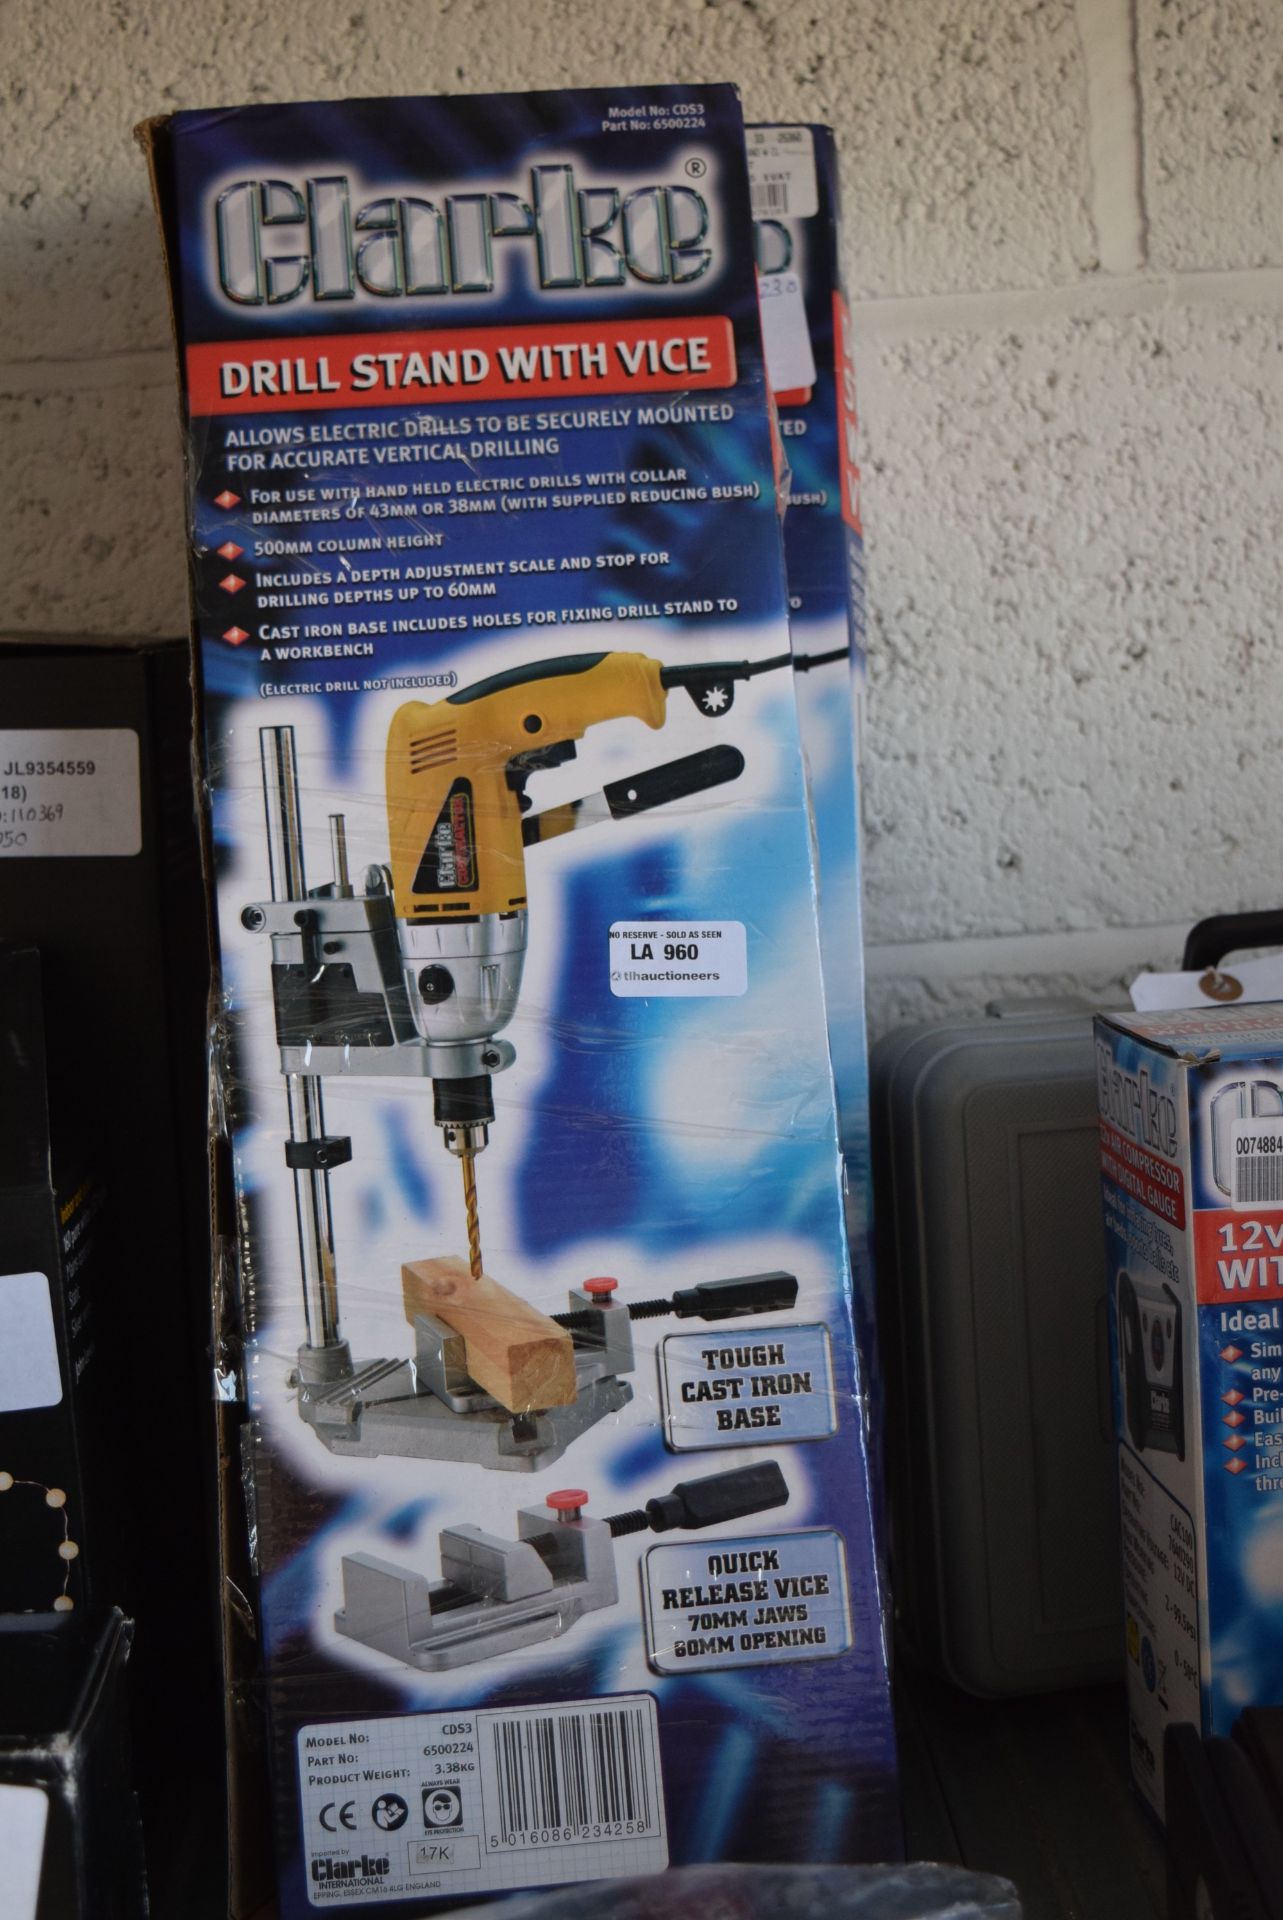 2 X BOXED CLARKE DRILL STANDS WITH VICE COMBINED RRP £40 18.04.18 2998